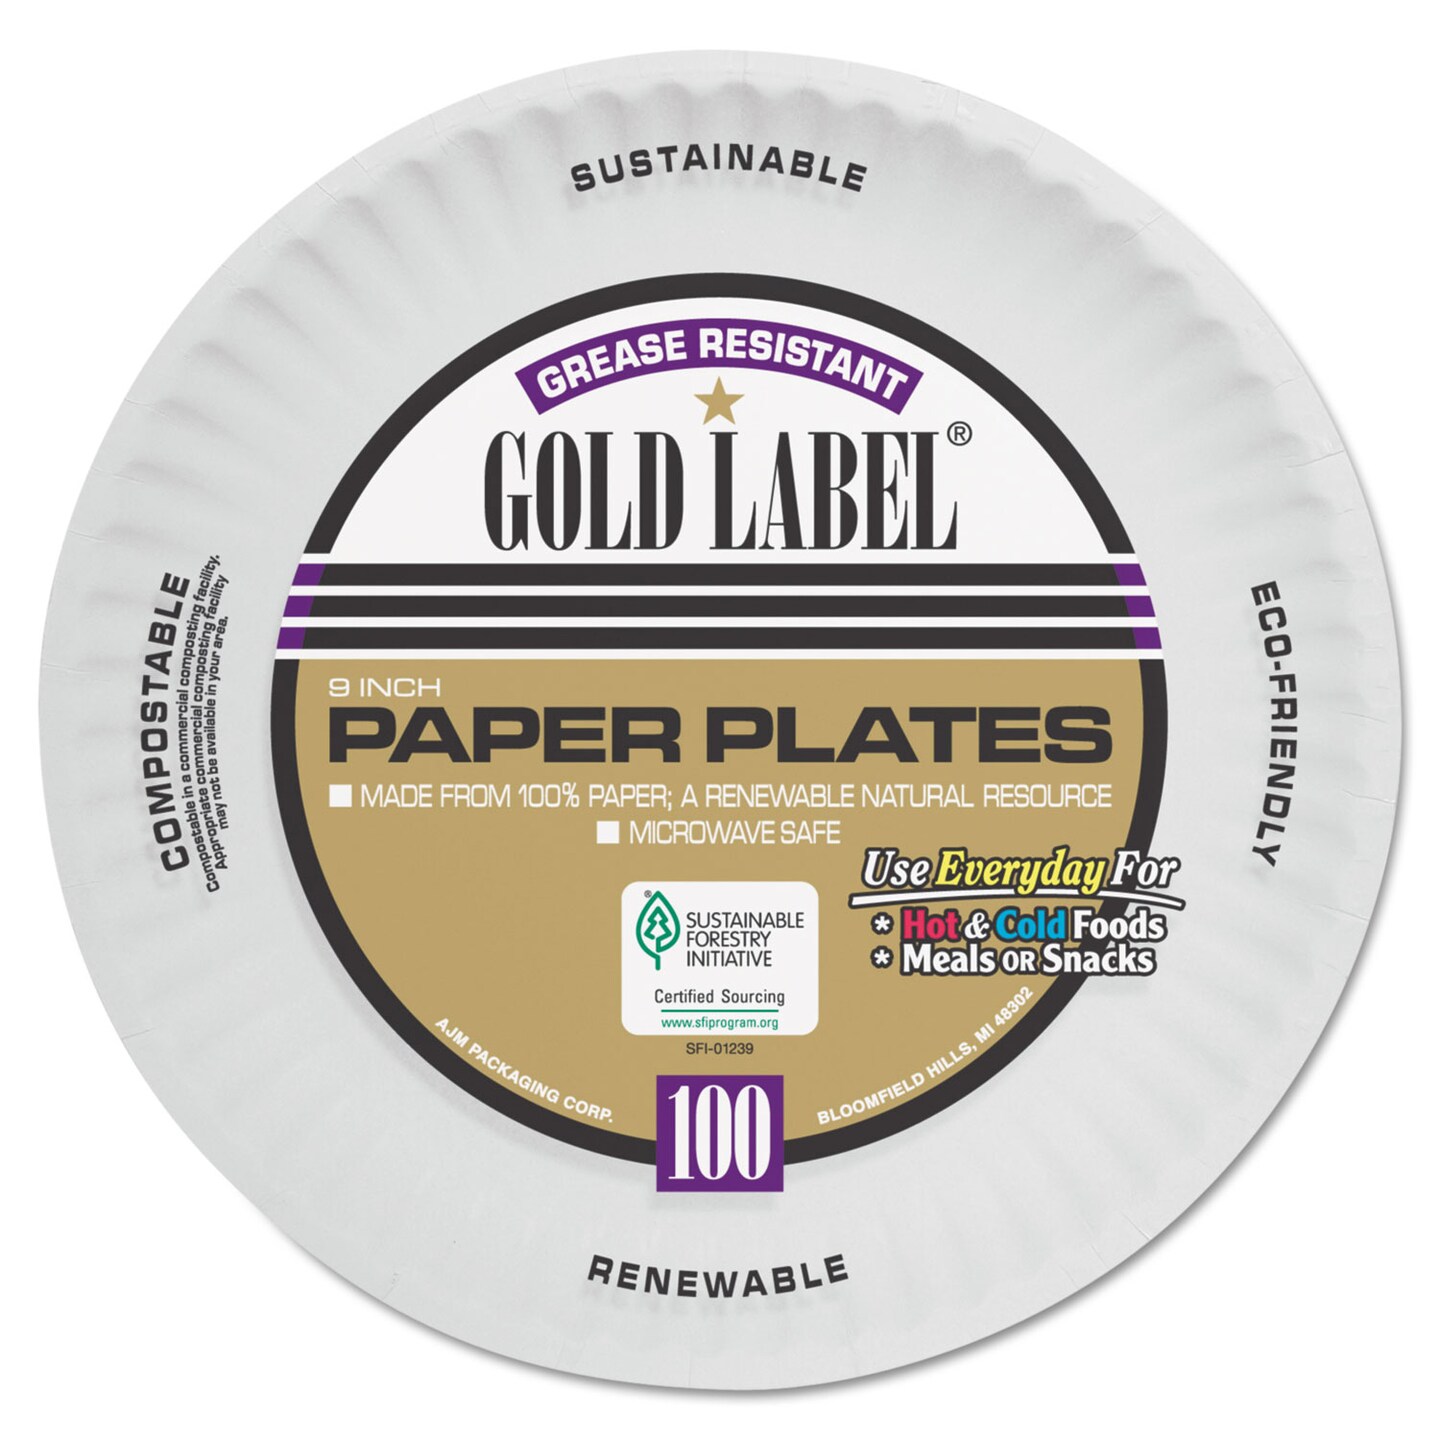 9 Eco-Friendly Plates with your logo